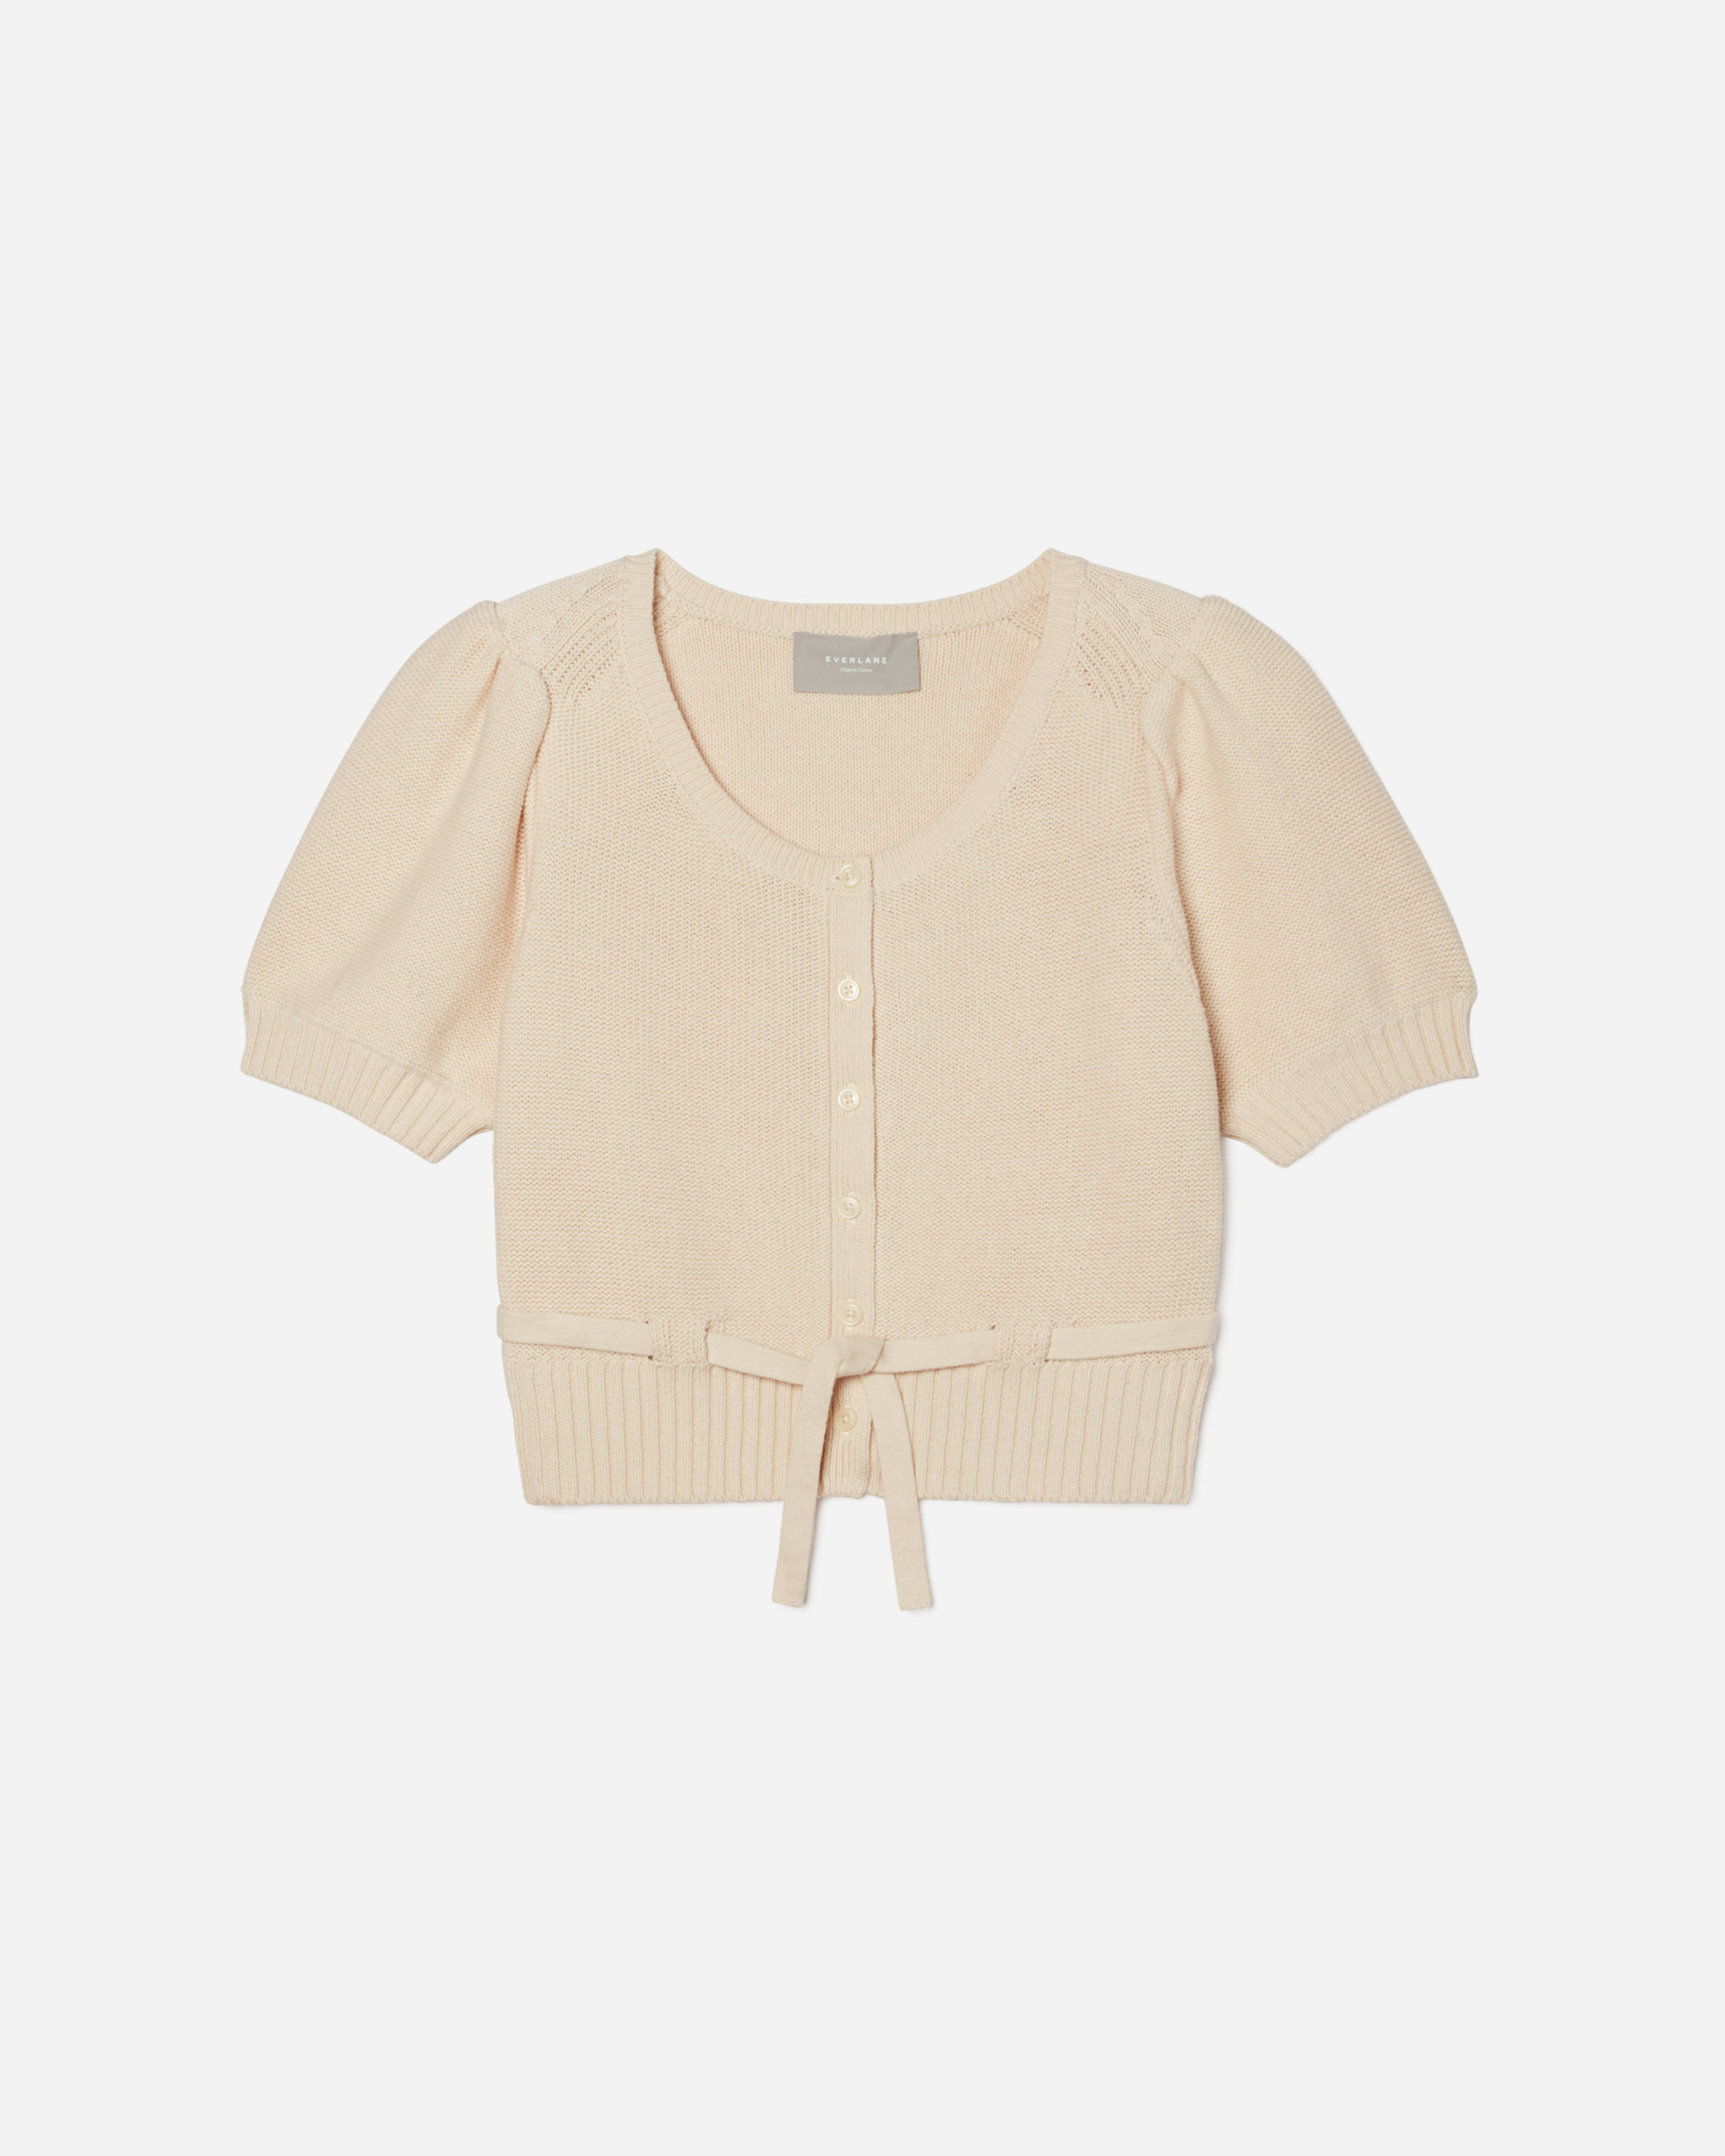 The Puff Sleeve Sweater Top Parchment – Everlane